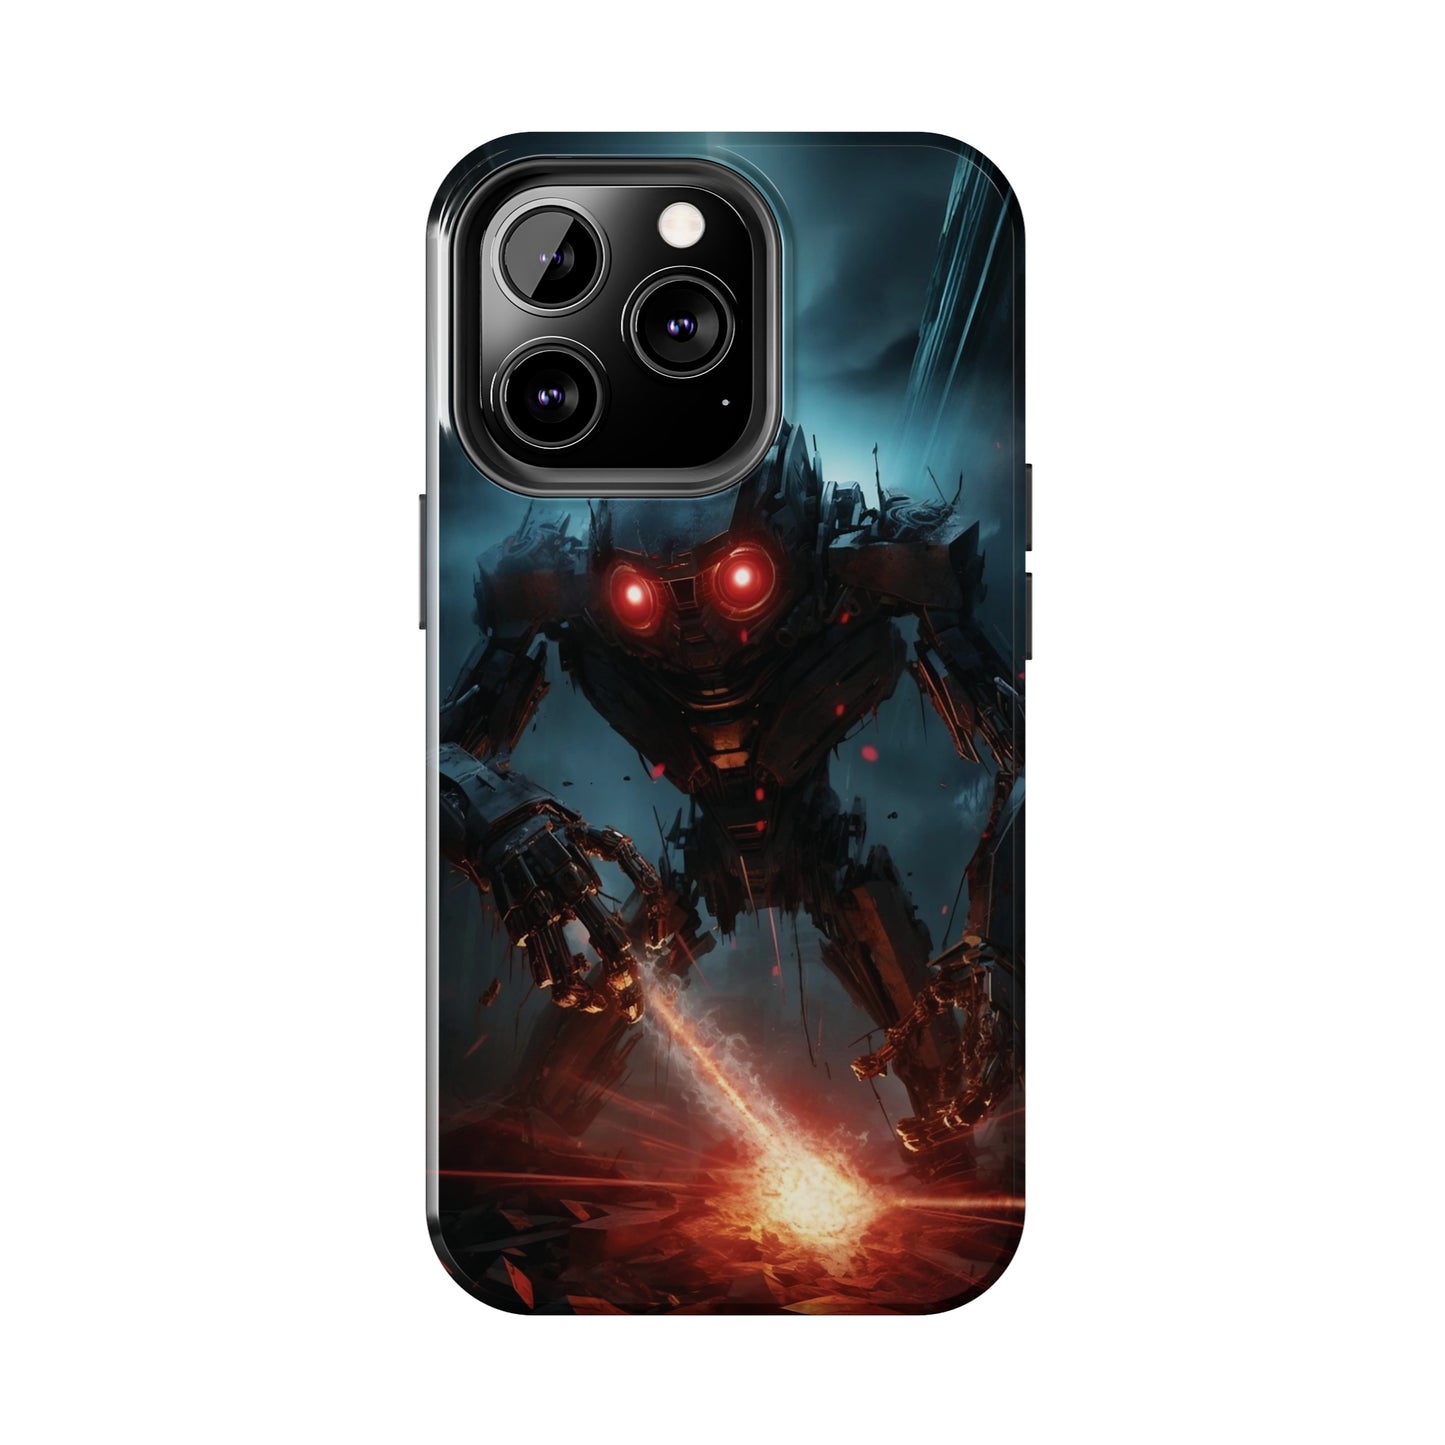 Futuristic Robot Battle iPhone Case, Sci-Fi Mech Warrior with Laser, Protective Phone Cover, Cool Tech Design for iPhone Models, Durable Phone Accessory Gift, Tough iPhone Case